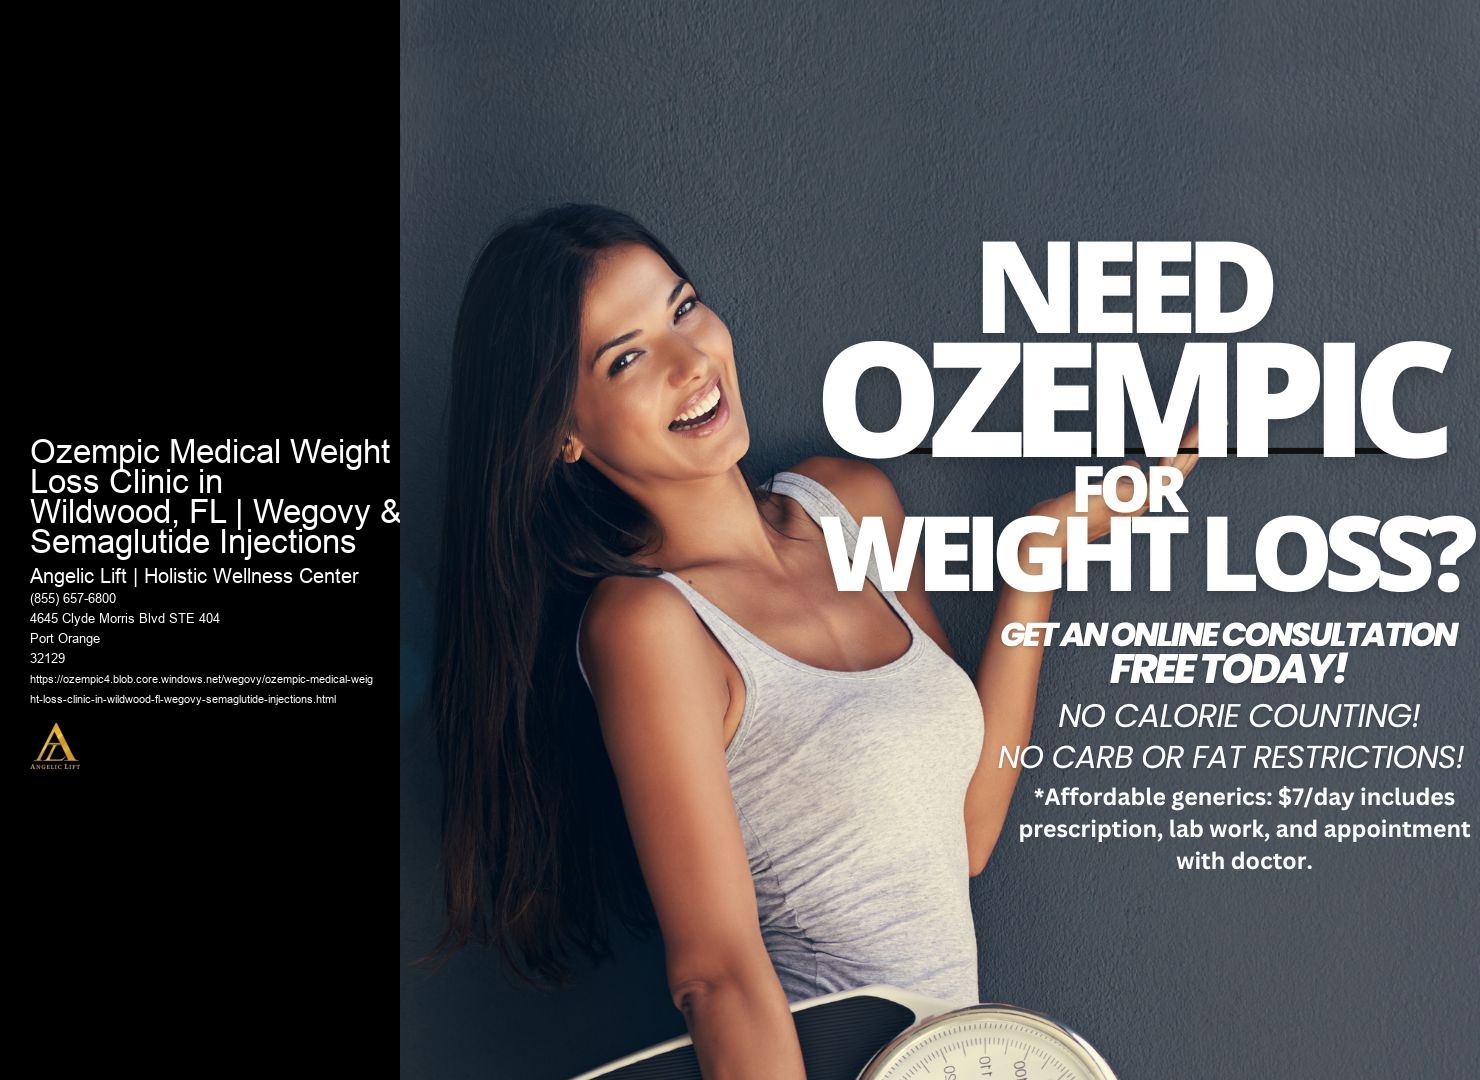 Ozempic Medical Weight Loss Clinic in Wildwood, FL | Wegovy & Semaglutide Injections